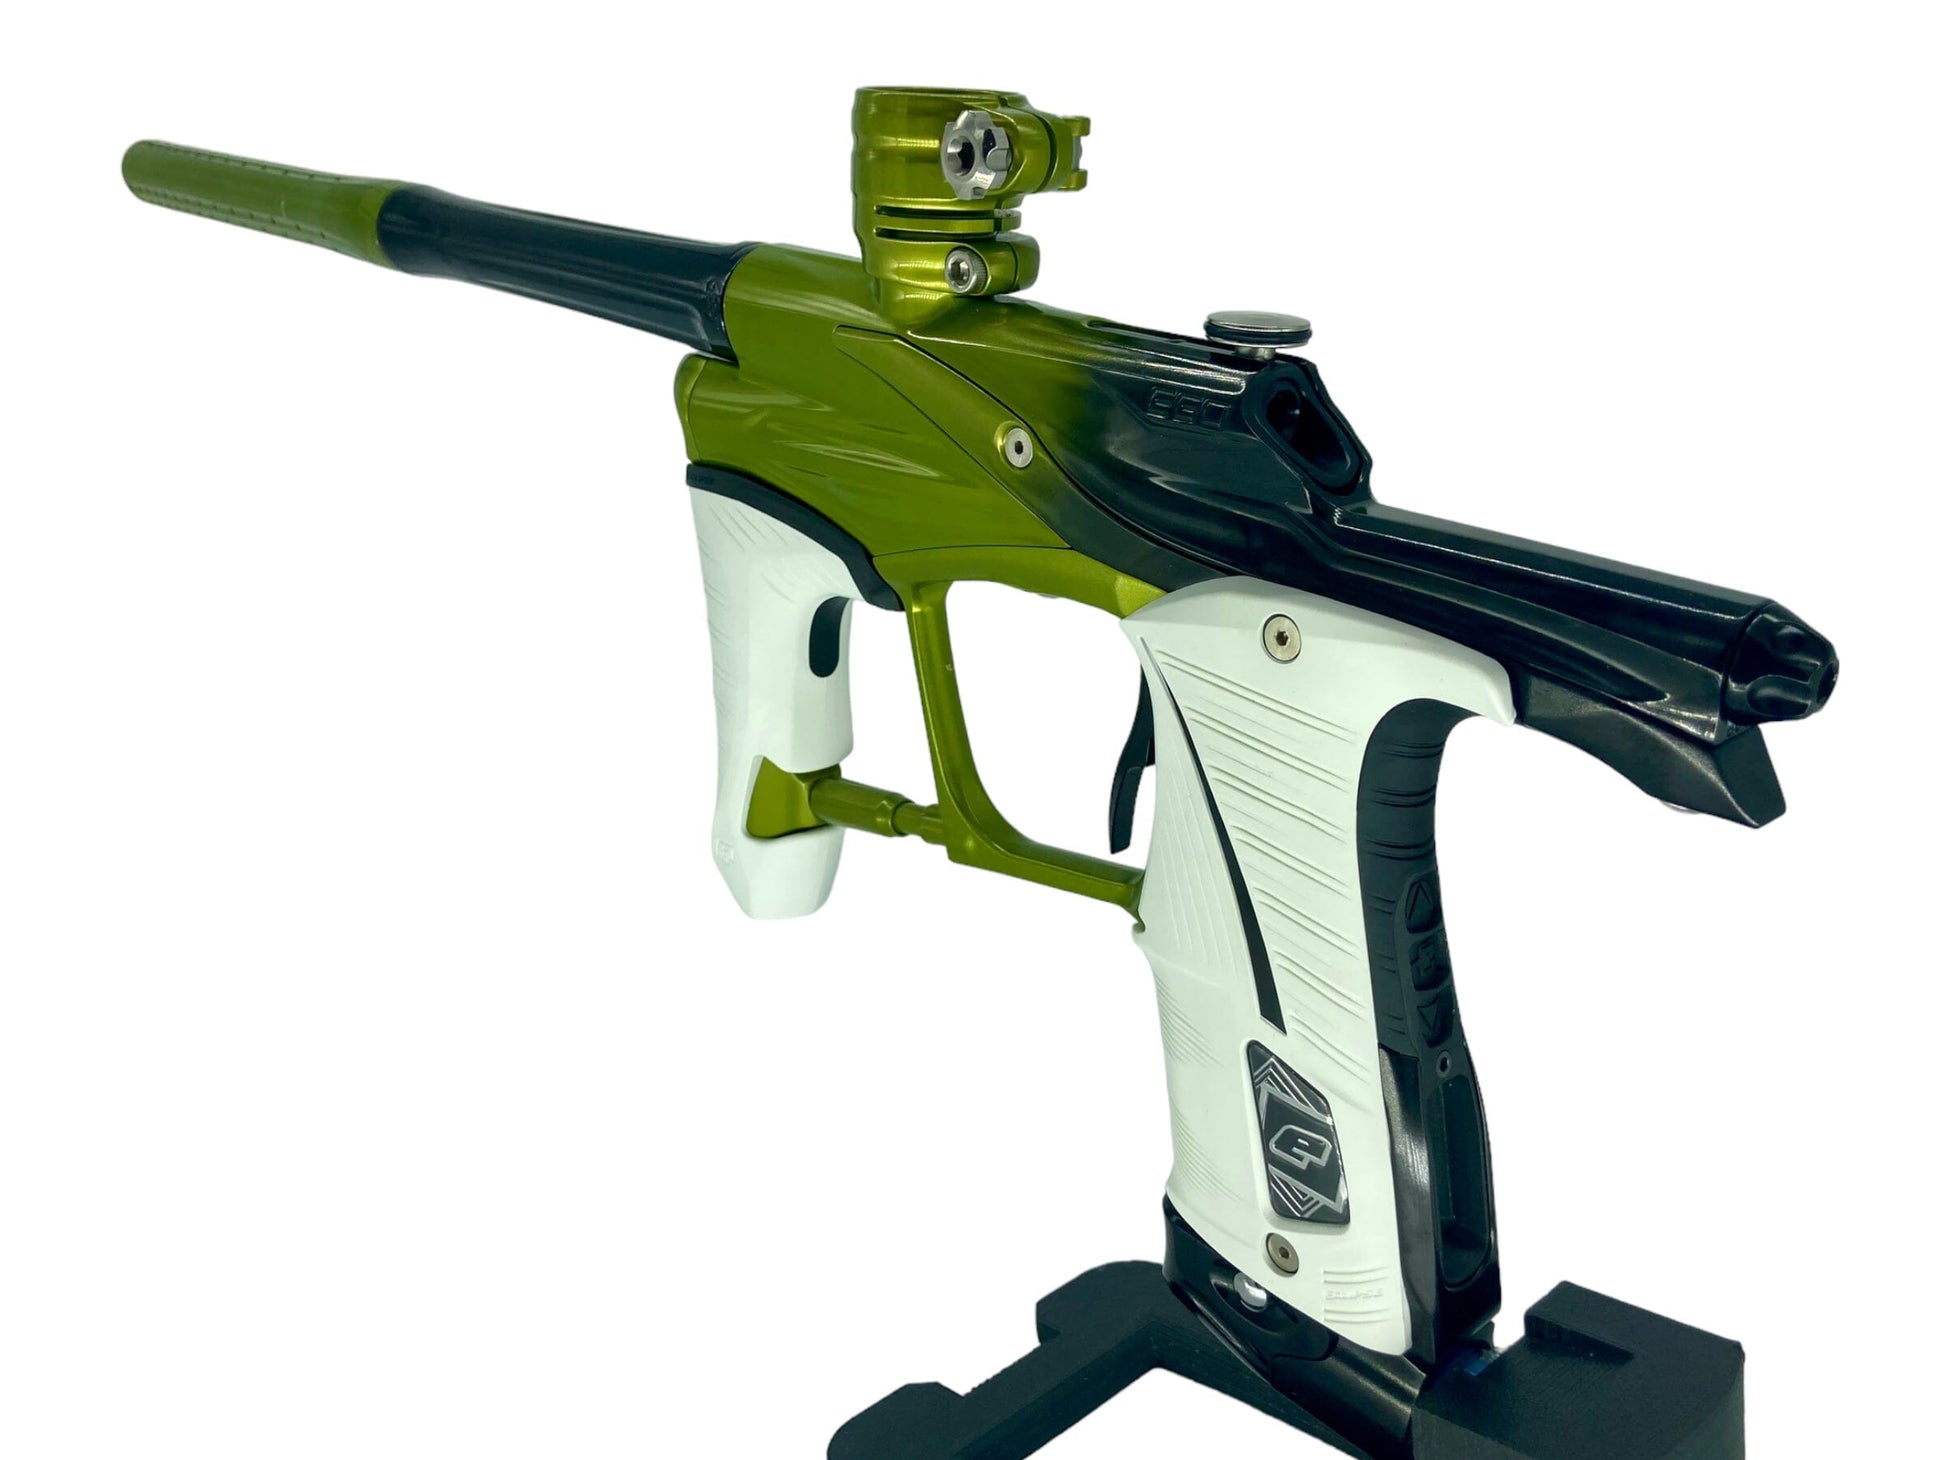 Planet Eclipse Ego LV1 to LV1.6 - Paintball Markers